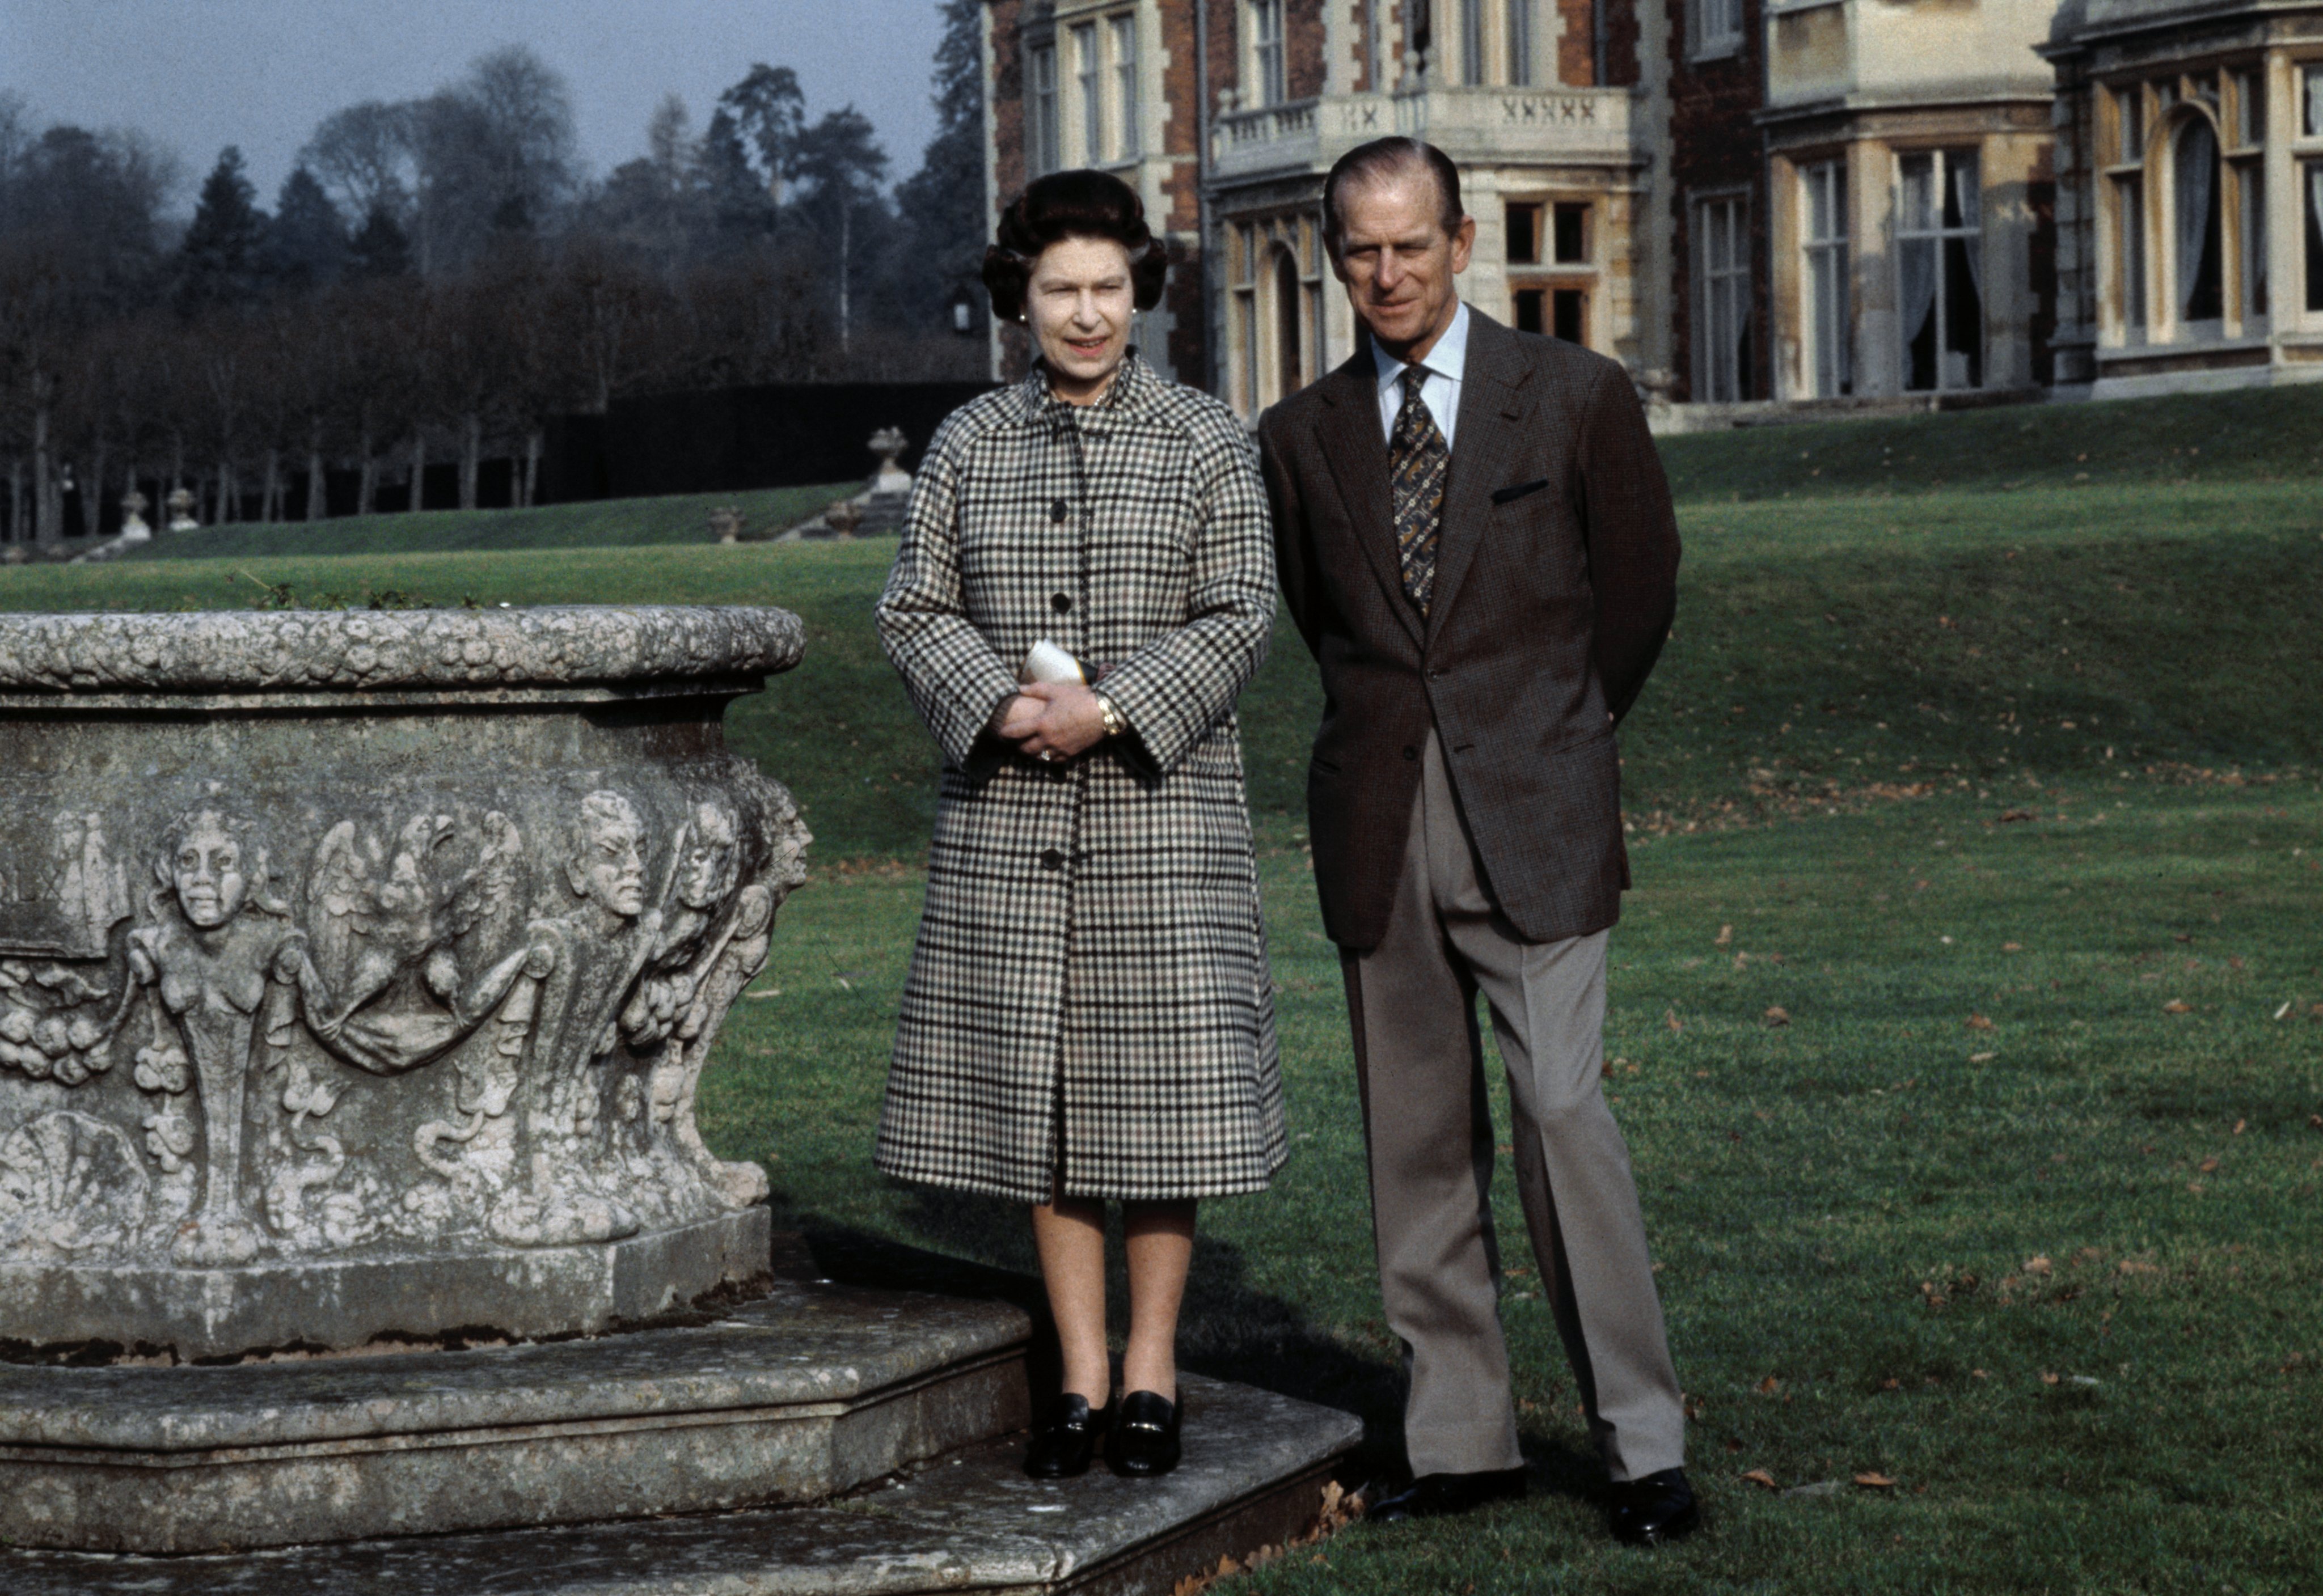 Queen Elizabeth II and Prince Philip Posing on Royal Grounds